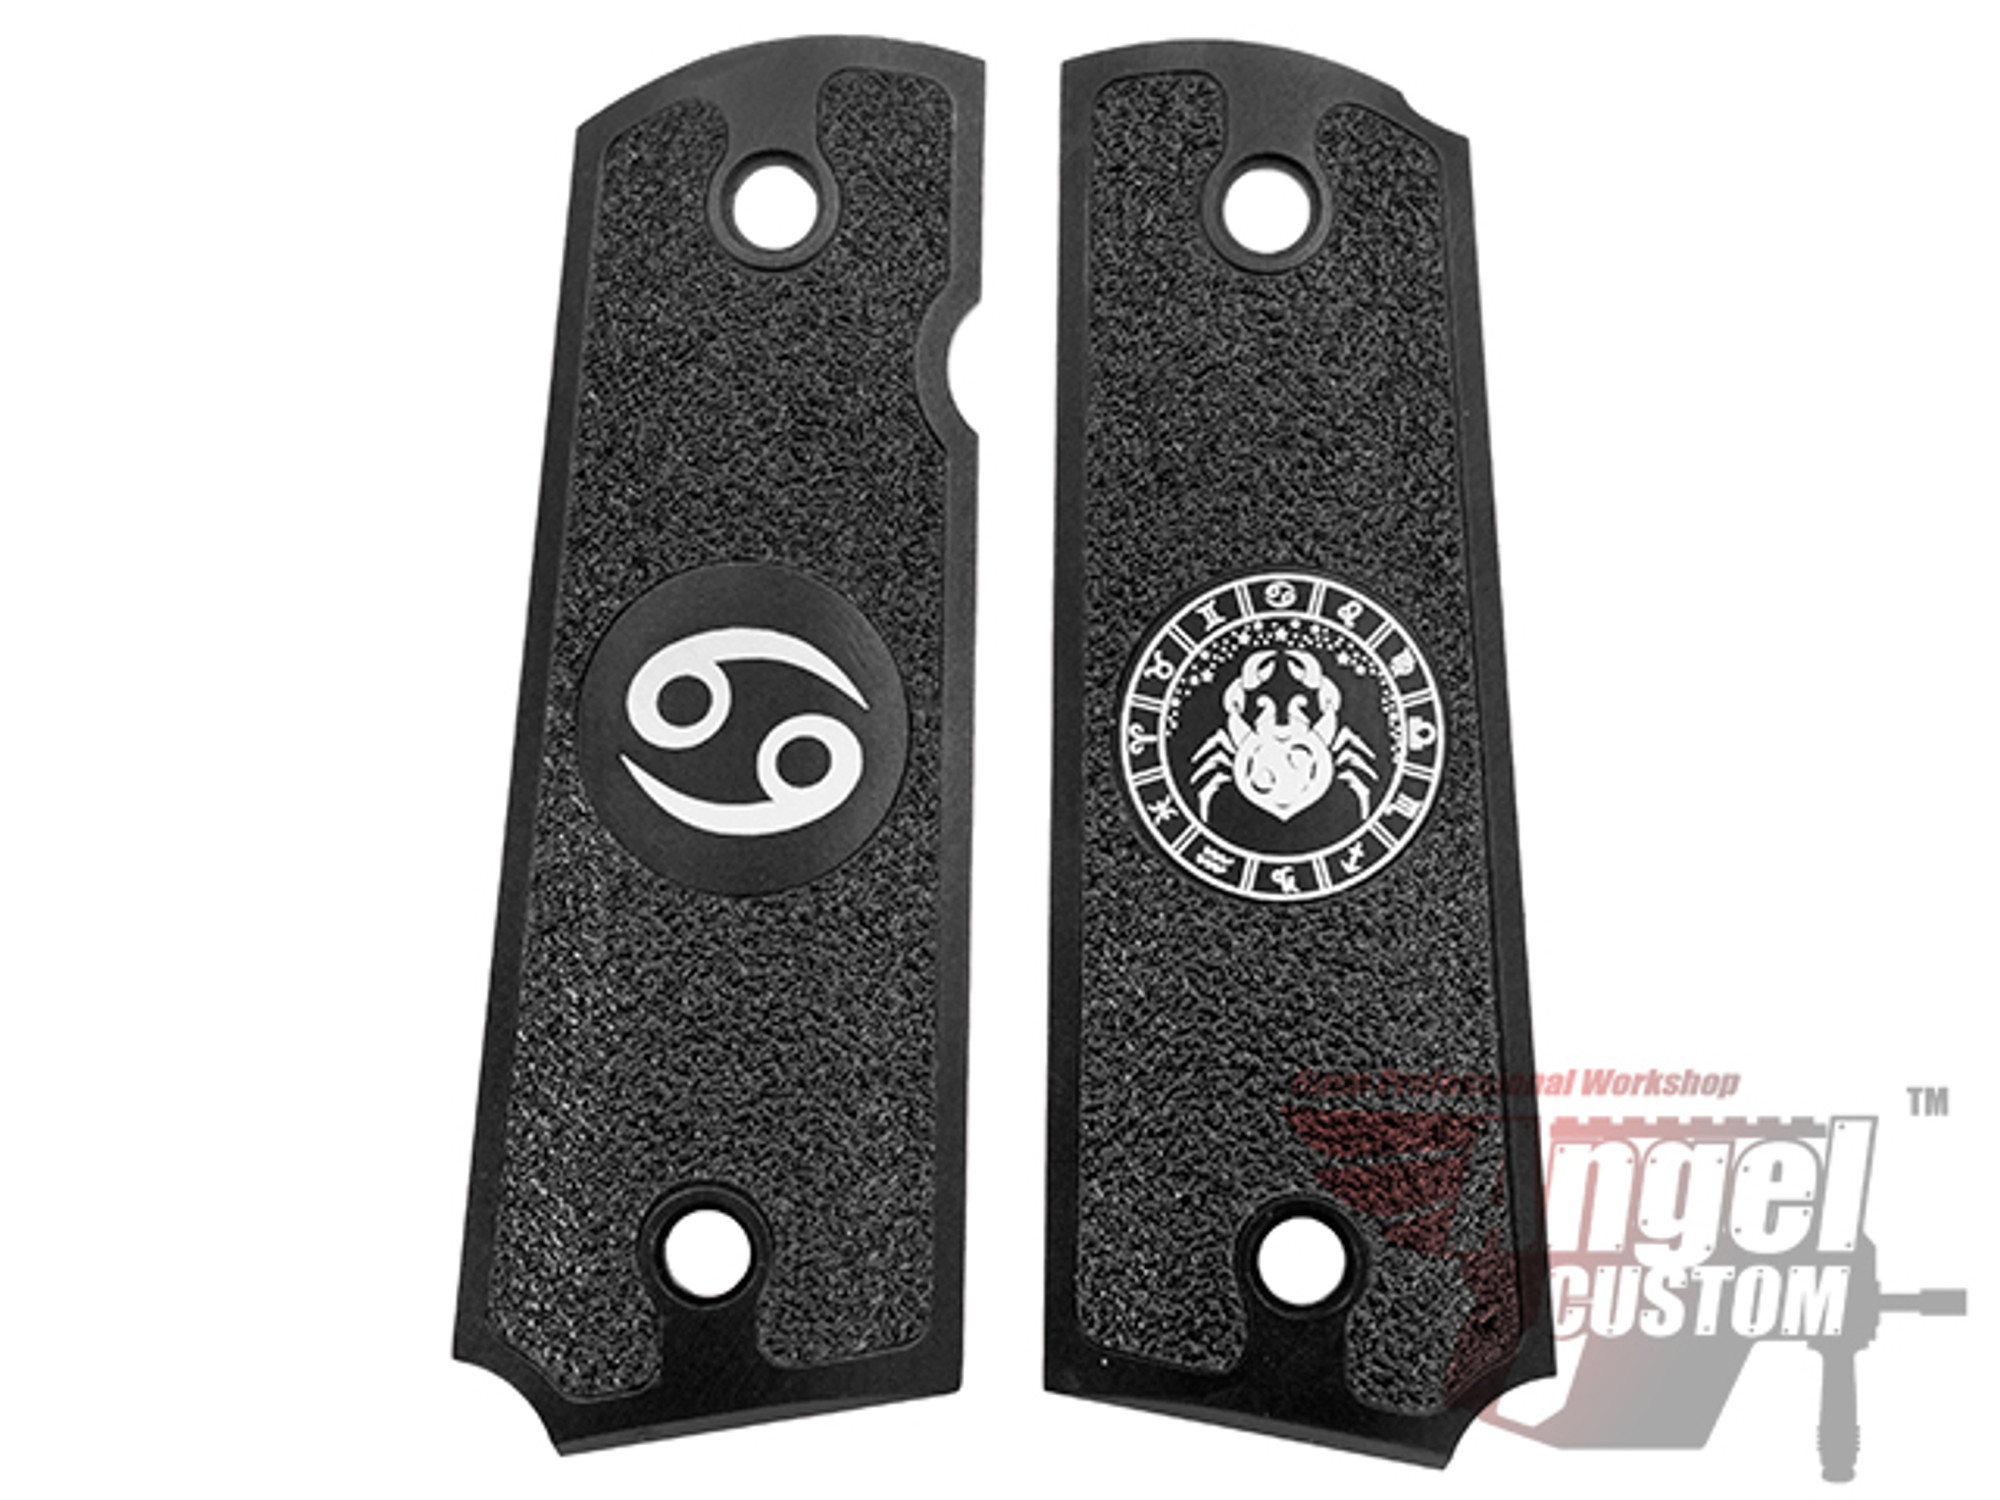 Angel Custom CNC Machined Tac-Glove "Zodiac" Grips for Tokyo Marui/KWA/Western Arms 1911 Series Airsoft Pistols - Cancer (Black)